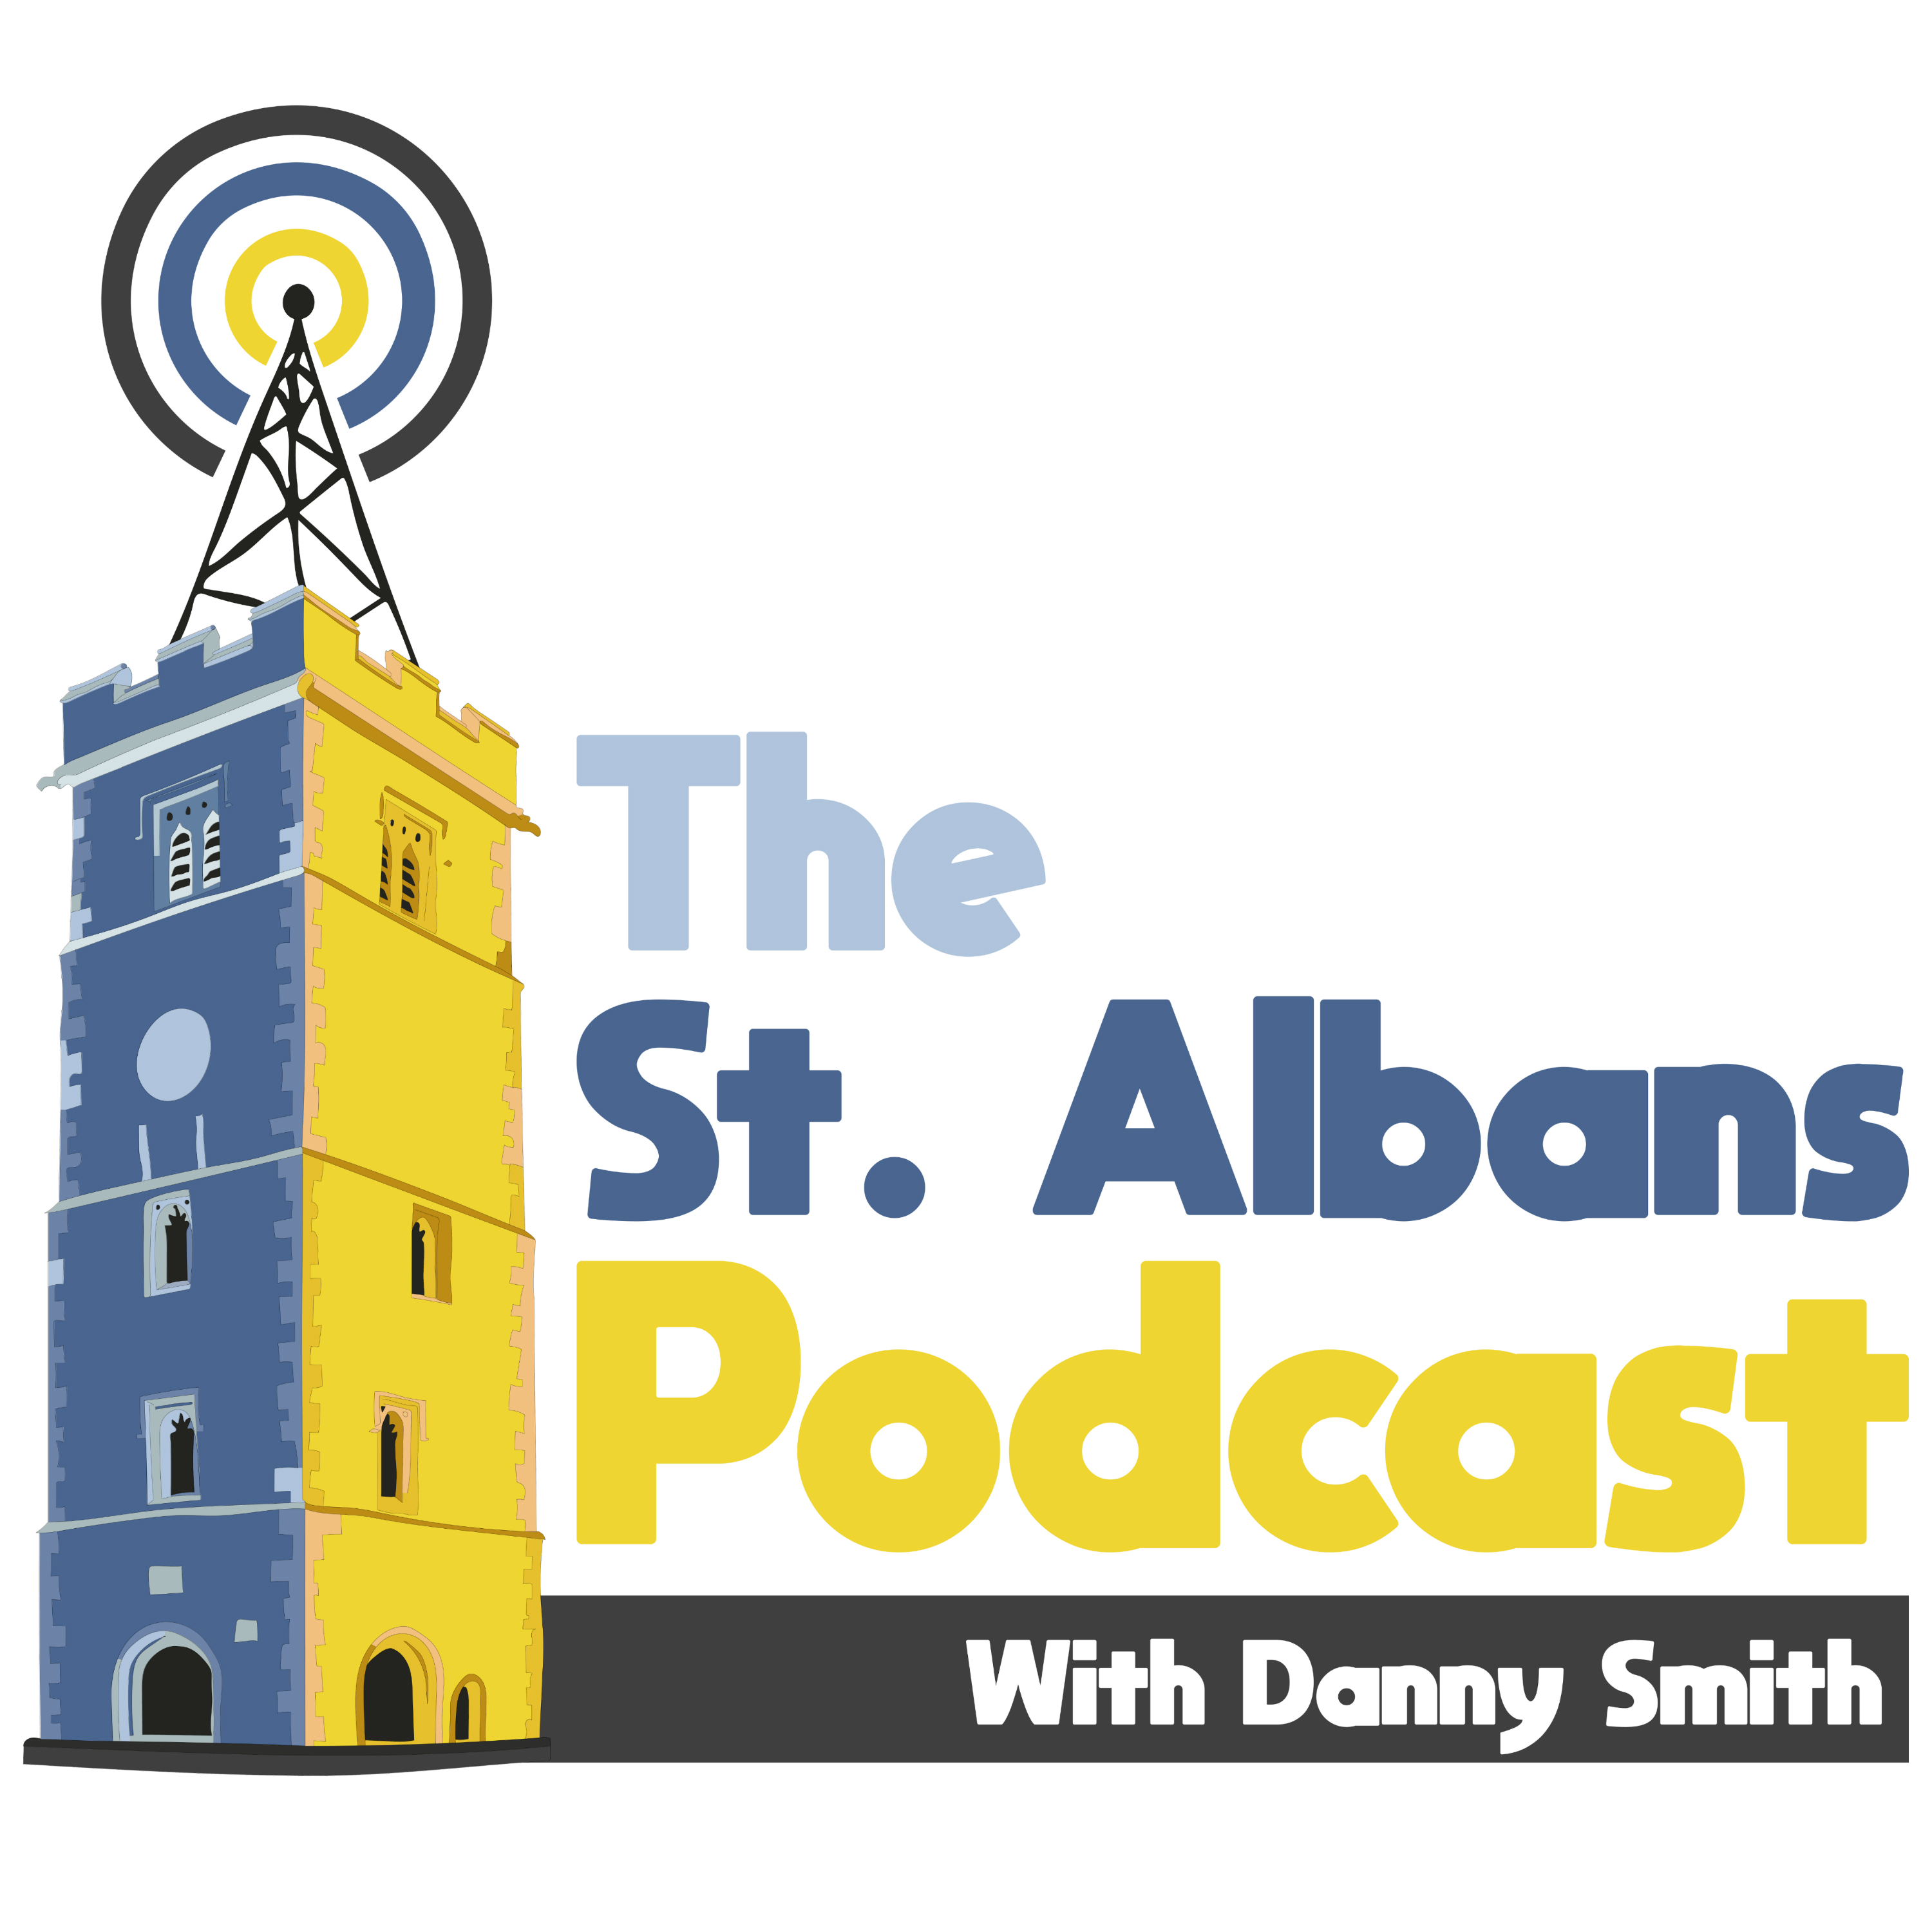 Podcast Archives - St Albans Podcast with Danny Smith